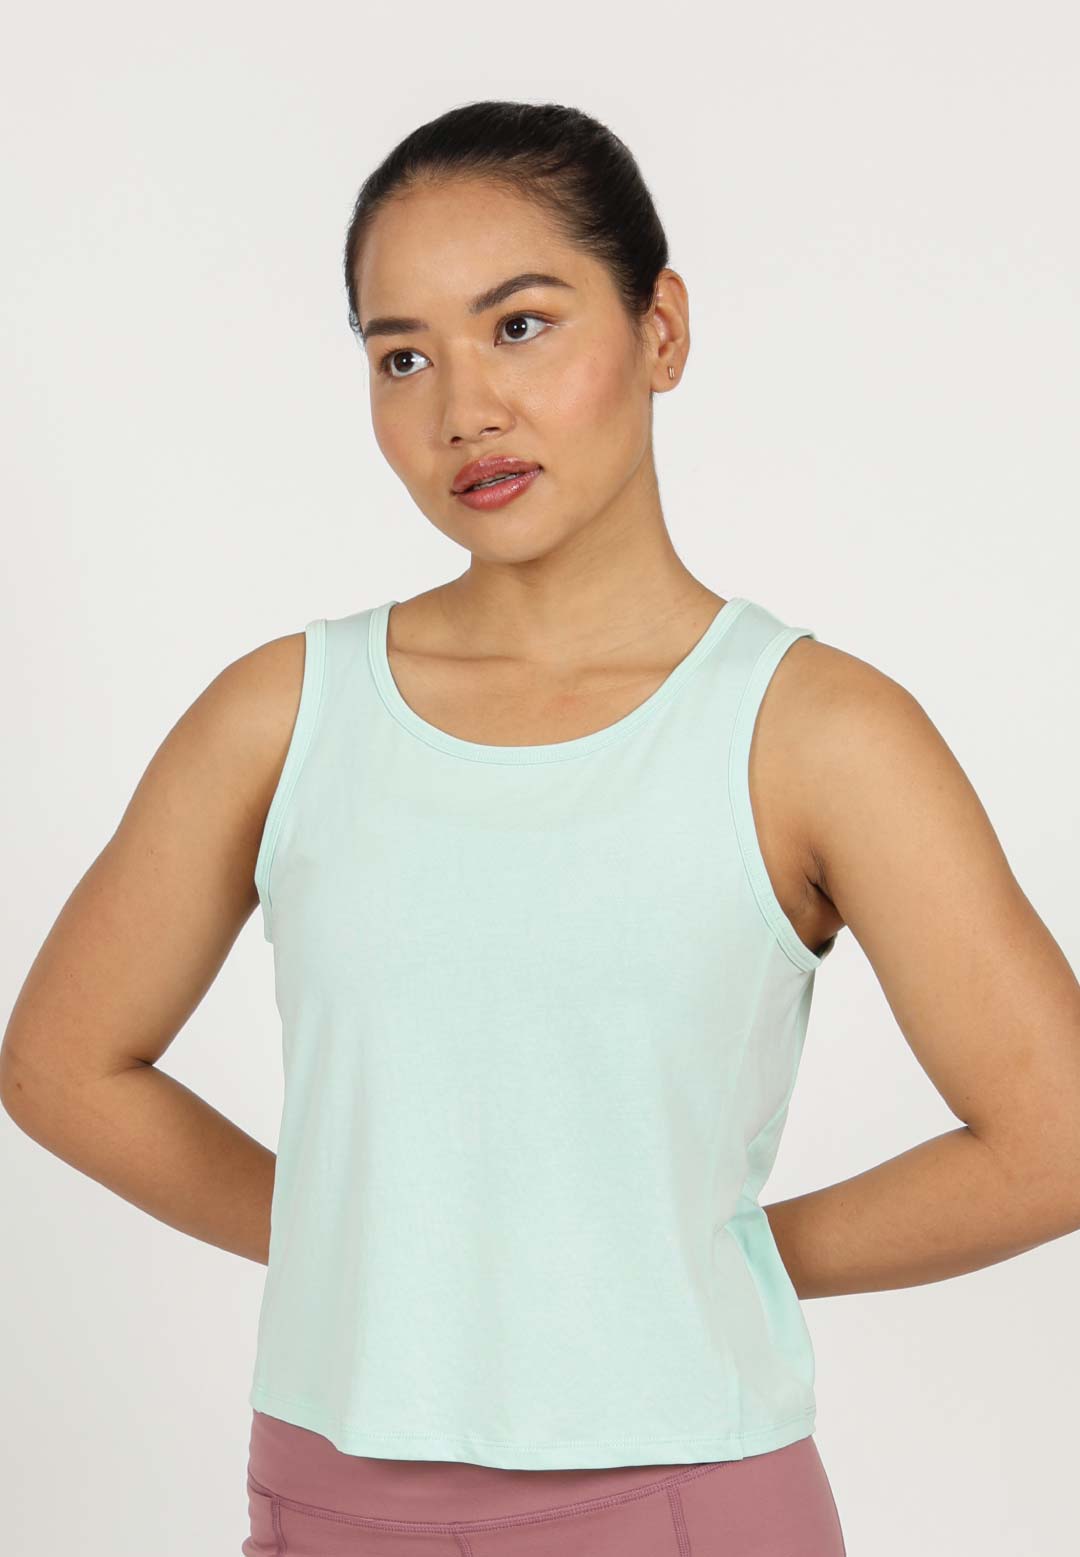 Women Plus Size French Razorback Tank Tops Sexy Deep V-Neck Hanging Neck  Built in Bras Camisole Summer Casual Sleeveless Vest (Color :  White+Turmeric